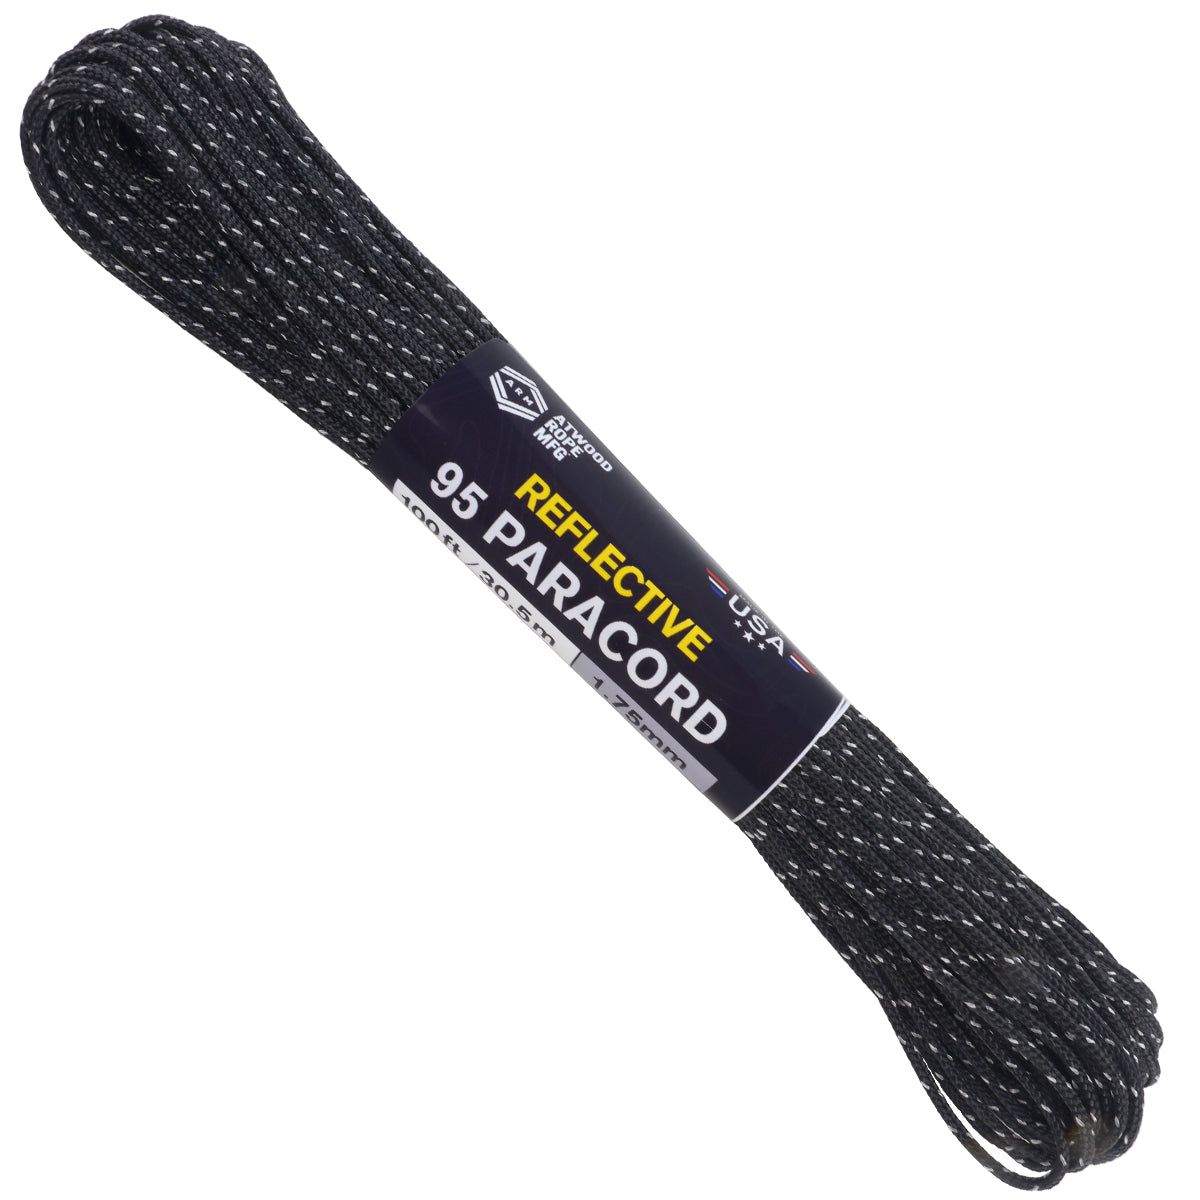 95 Paracord - Black Reflective – Atwood Rope MFG